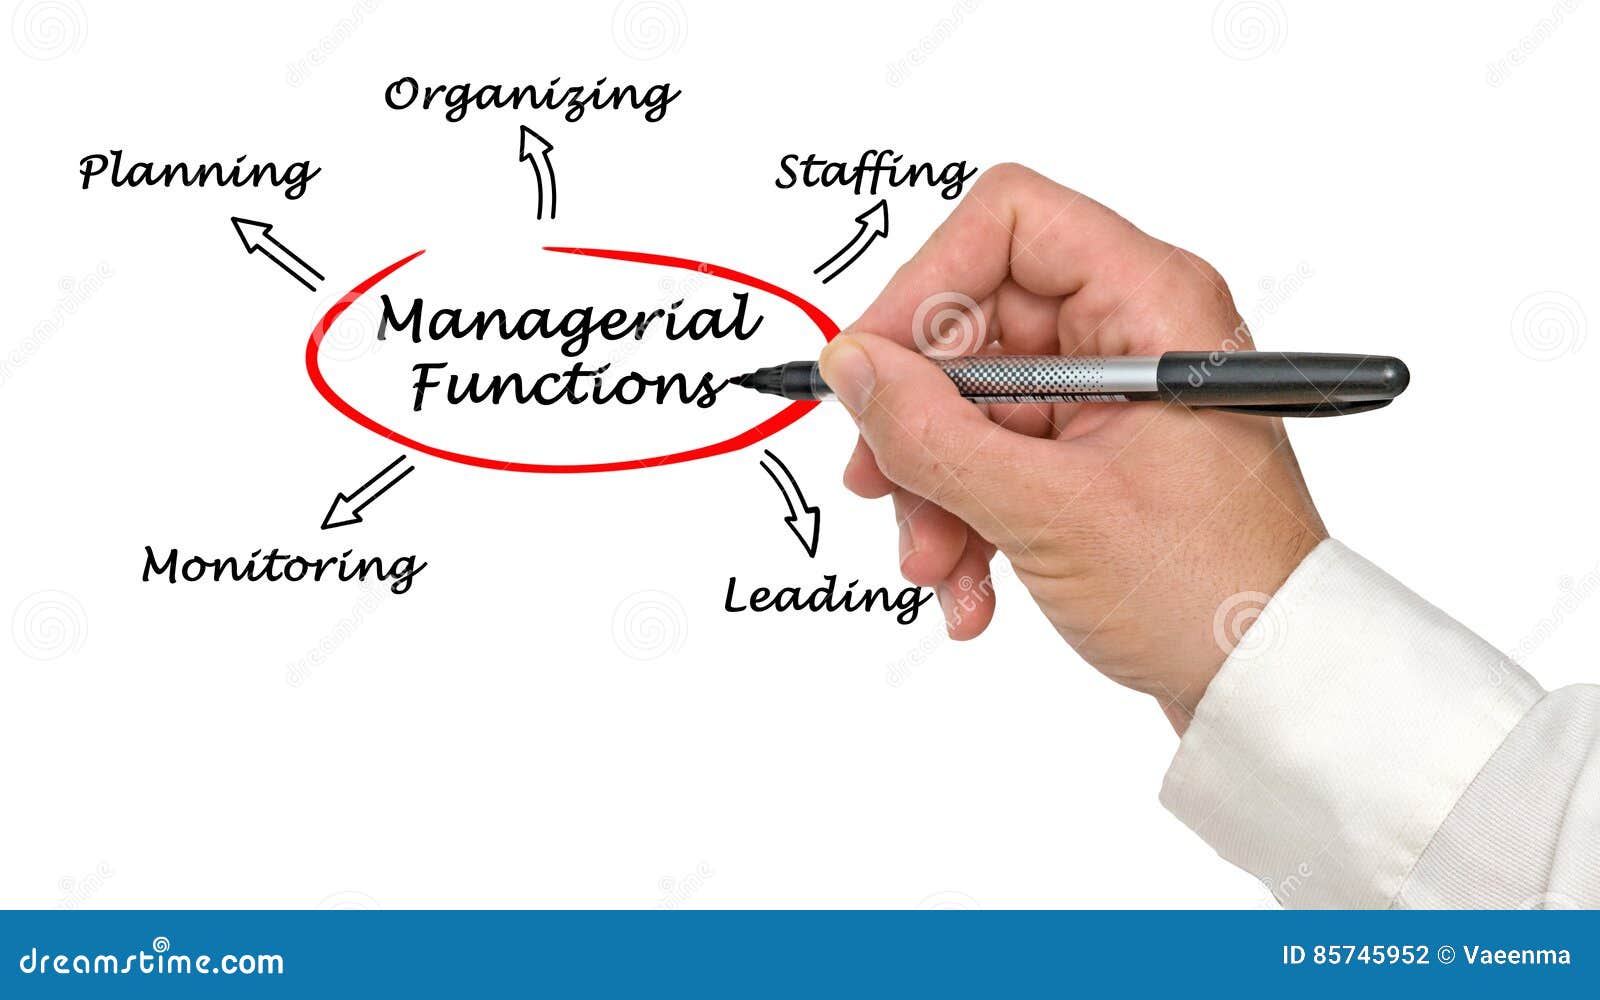 managerial functions